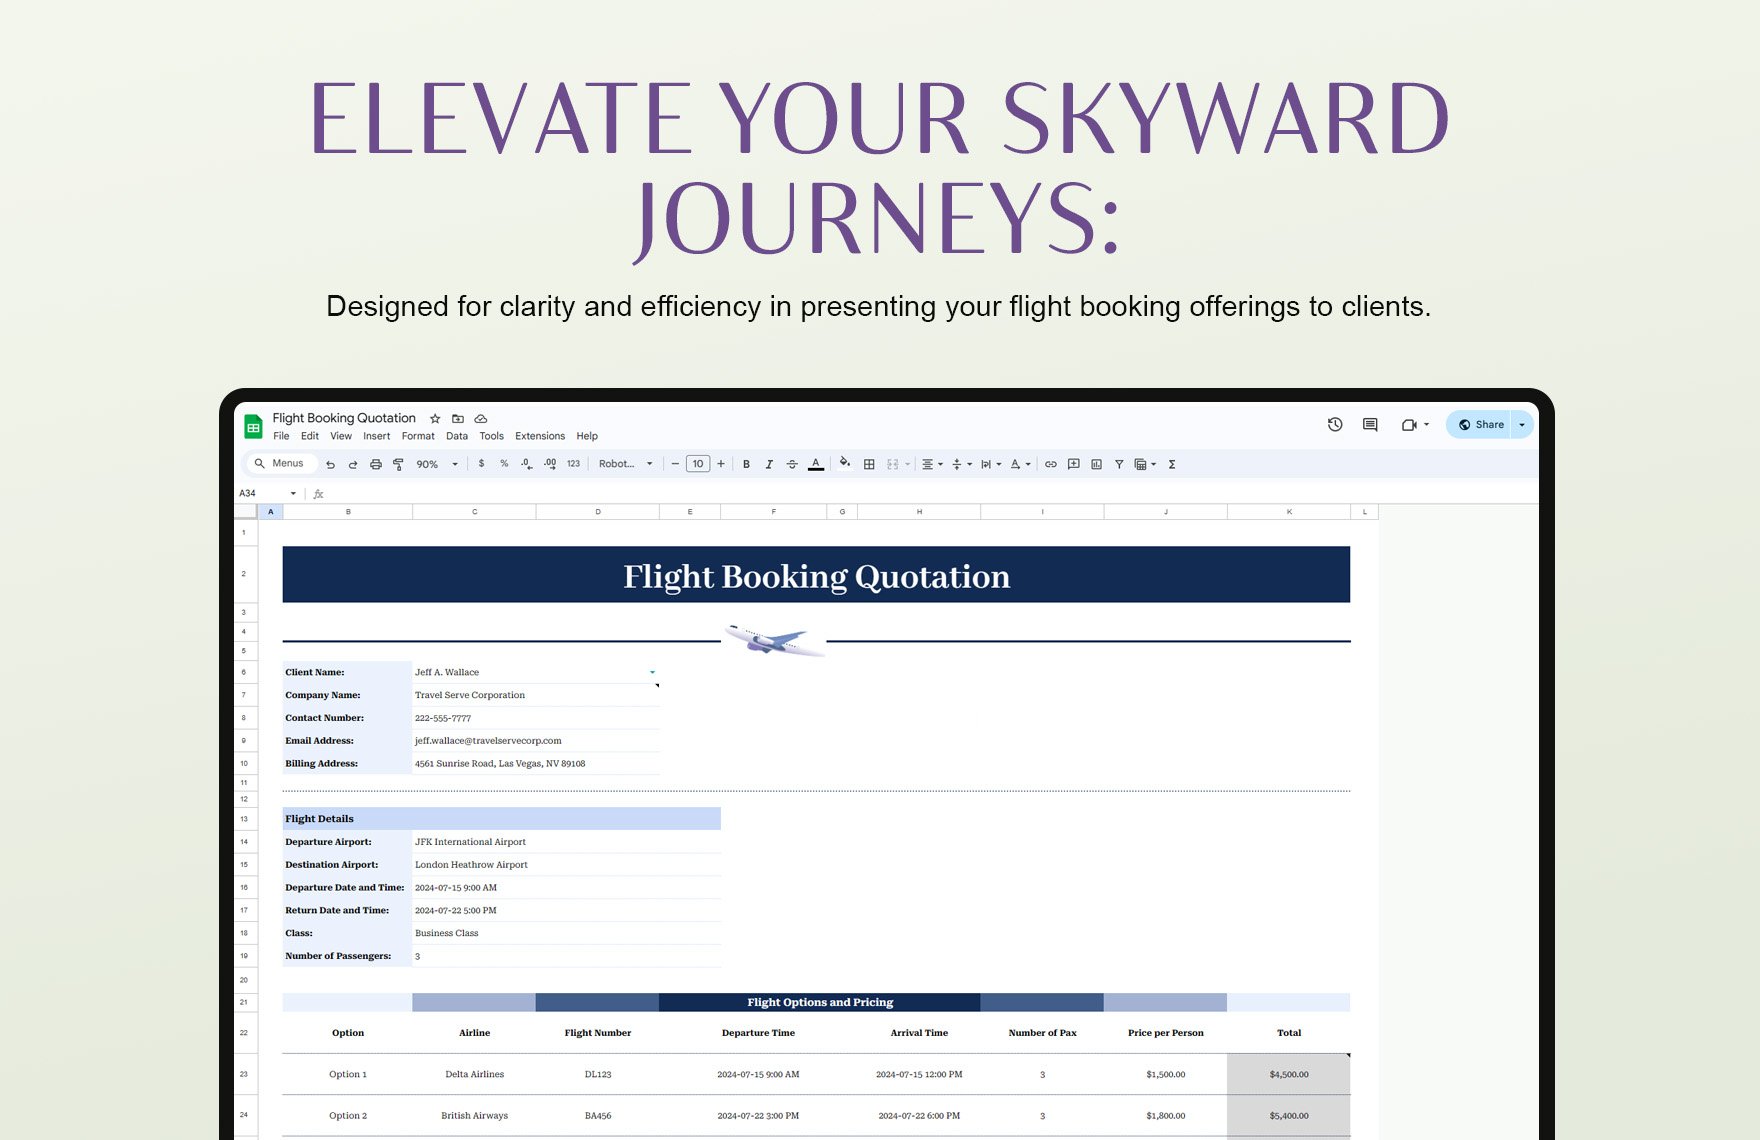 Flight Booking Quotation Template